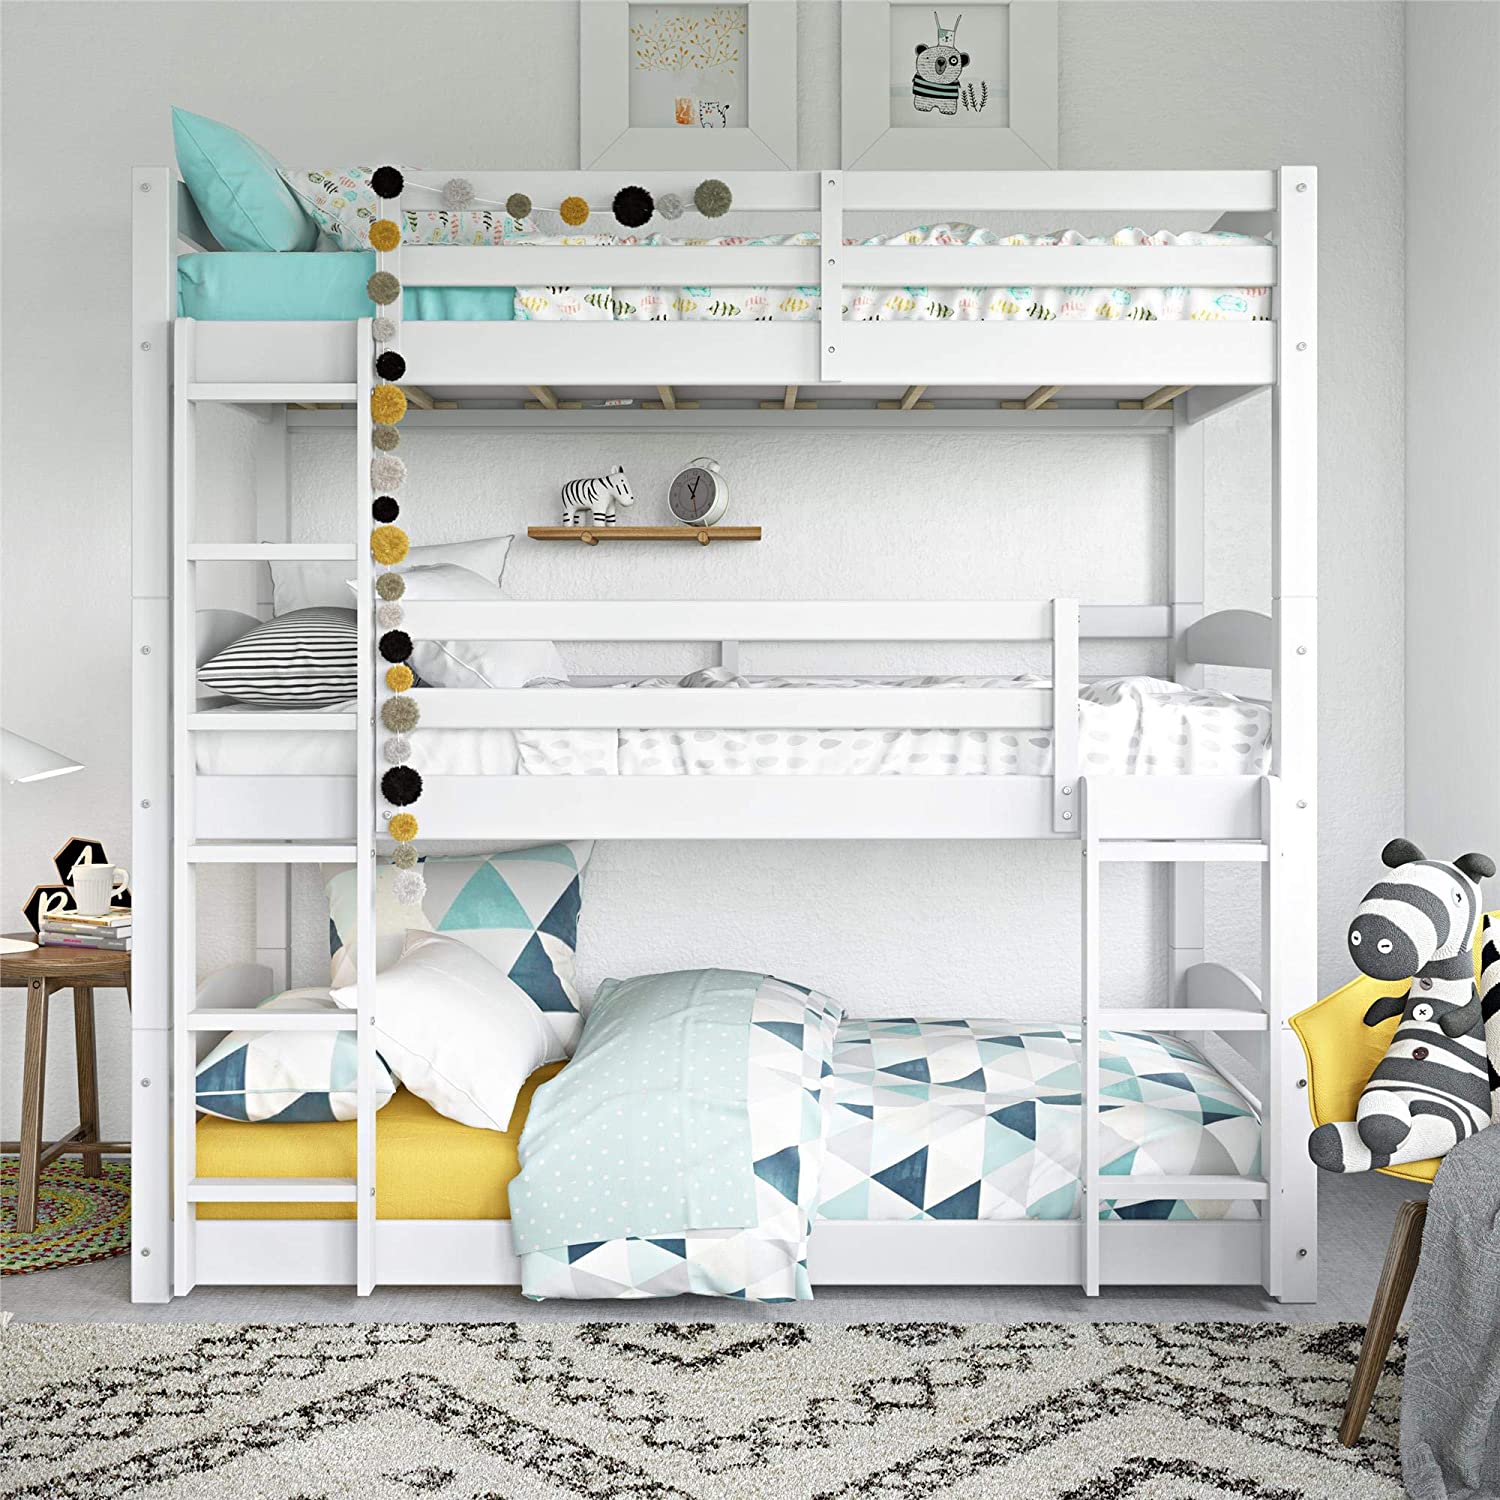 26 Bunk Beds You Ll Want For Yourself, Boy And Girl Bunk Bed Bedding